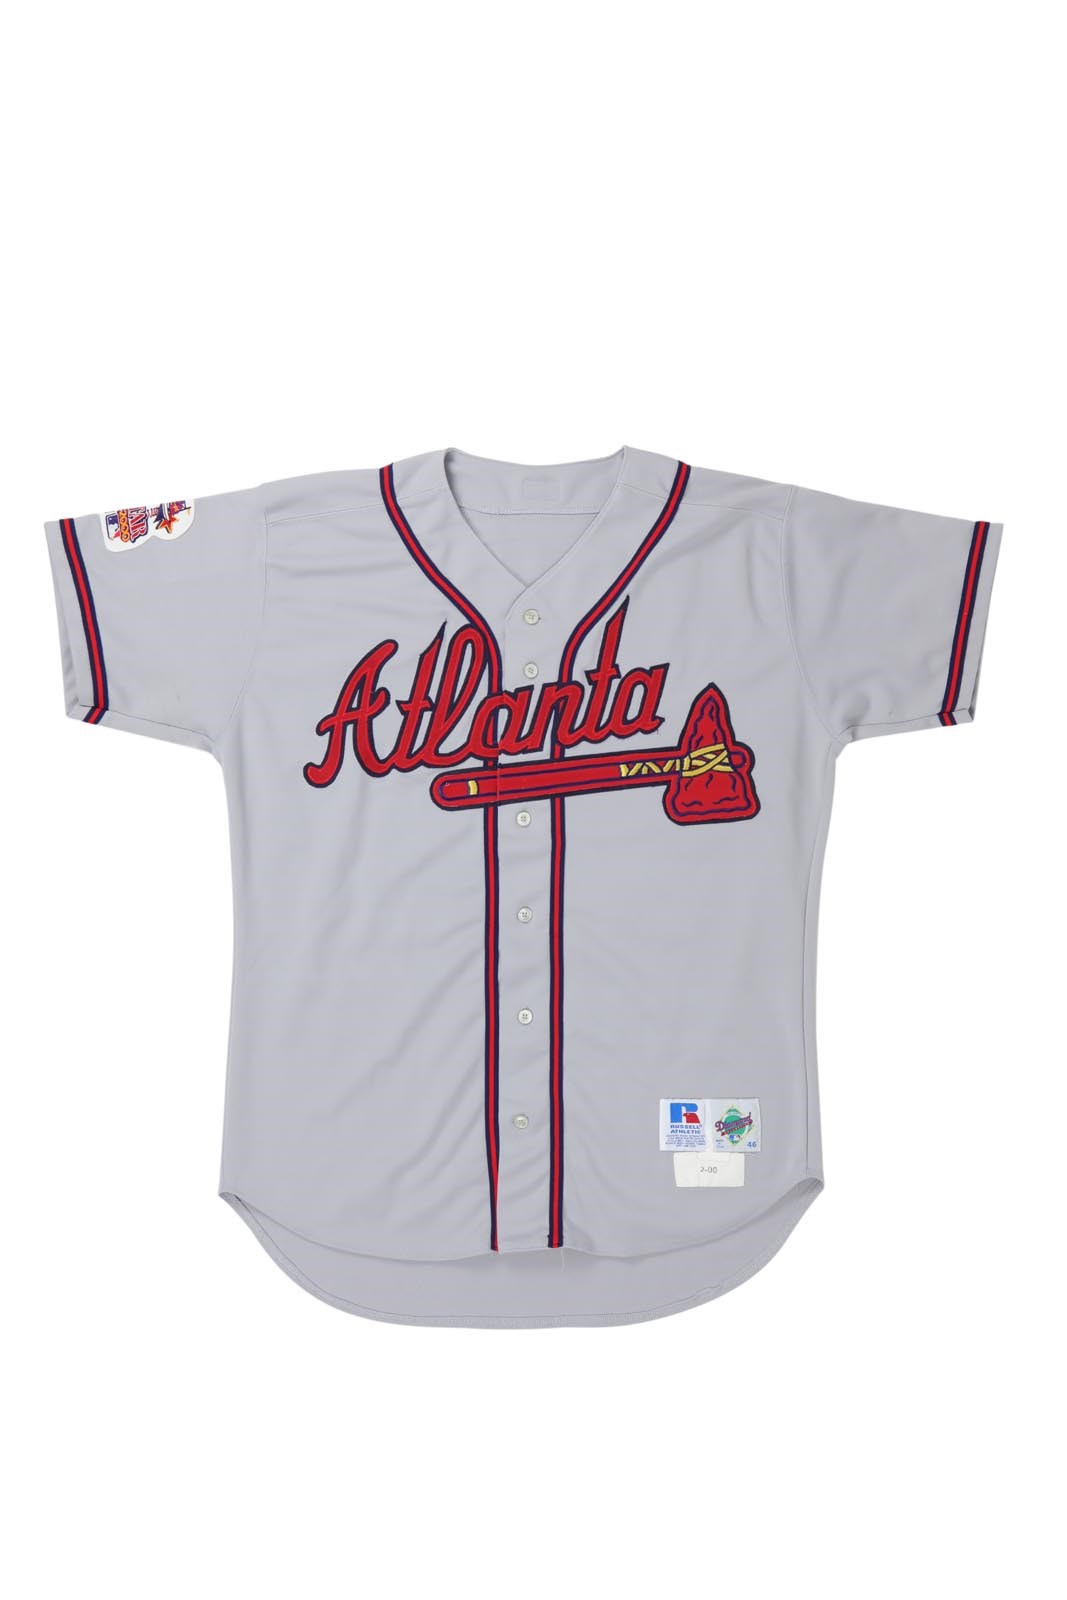 Baseball Equipment - 2000 George Lombard Atlanta Braves Game Worn Jersey w/All Star Game Patch